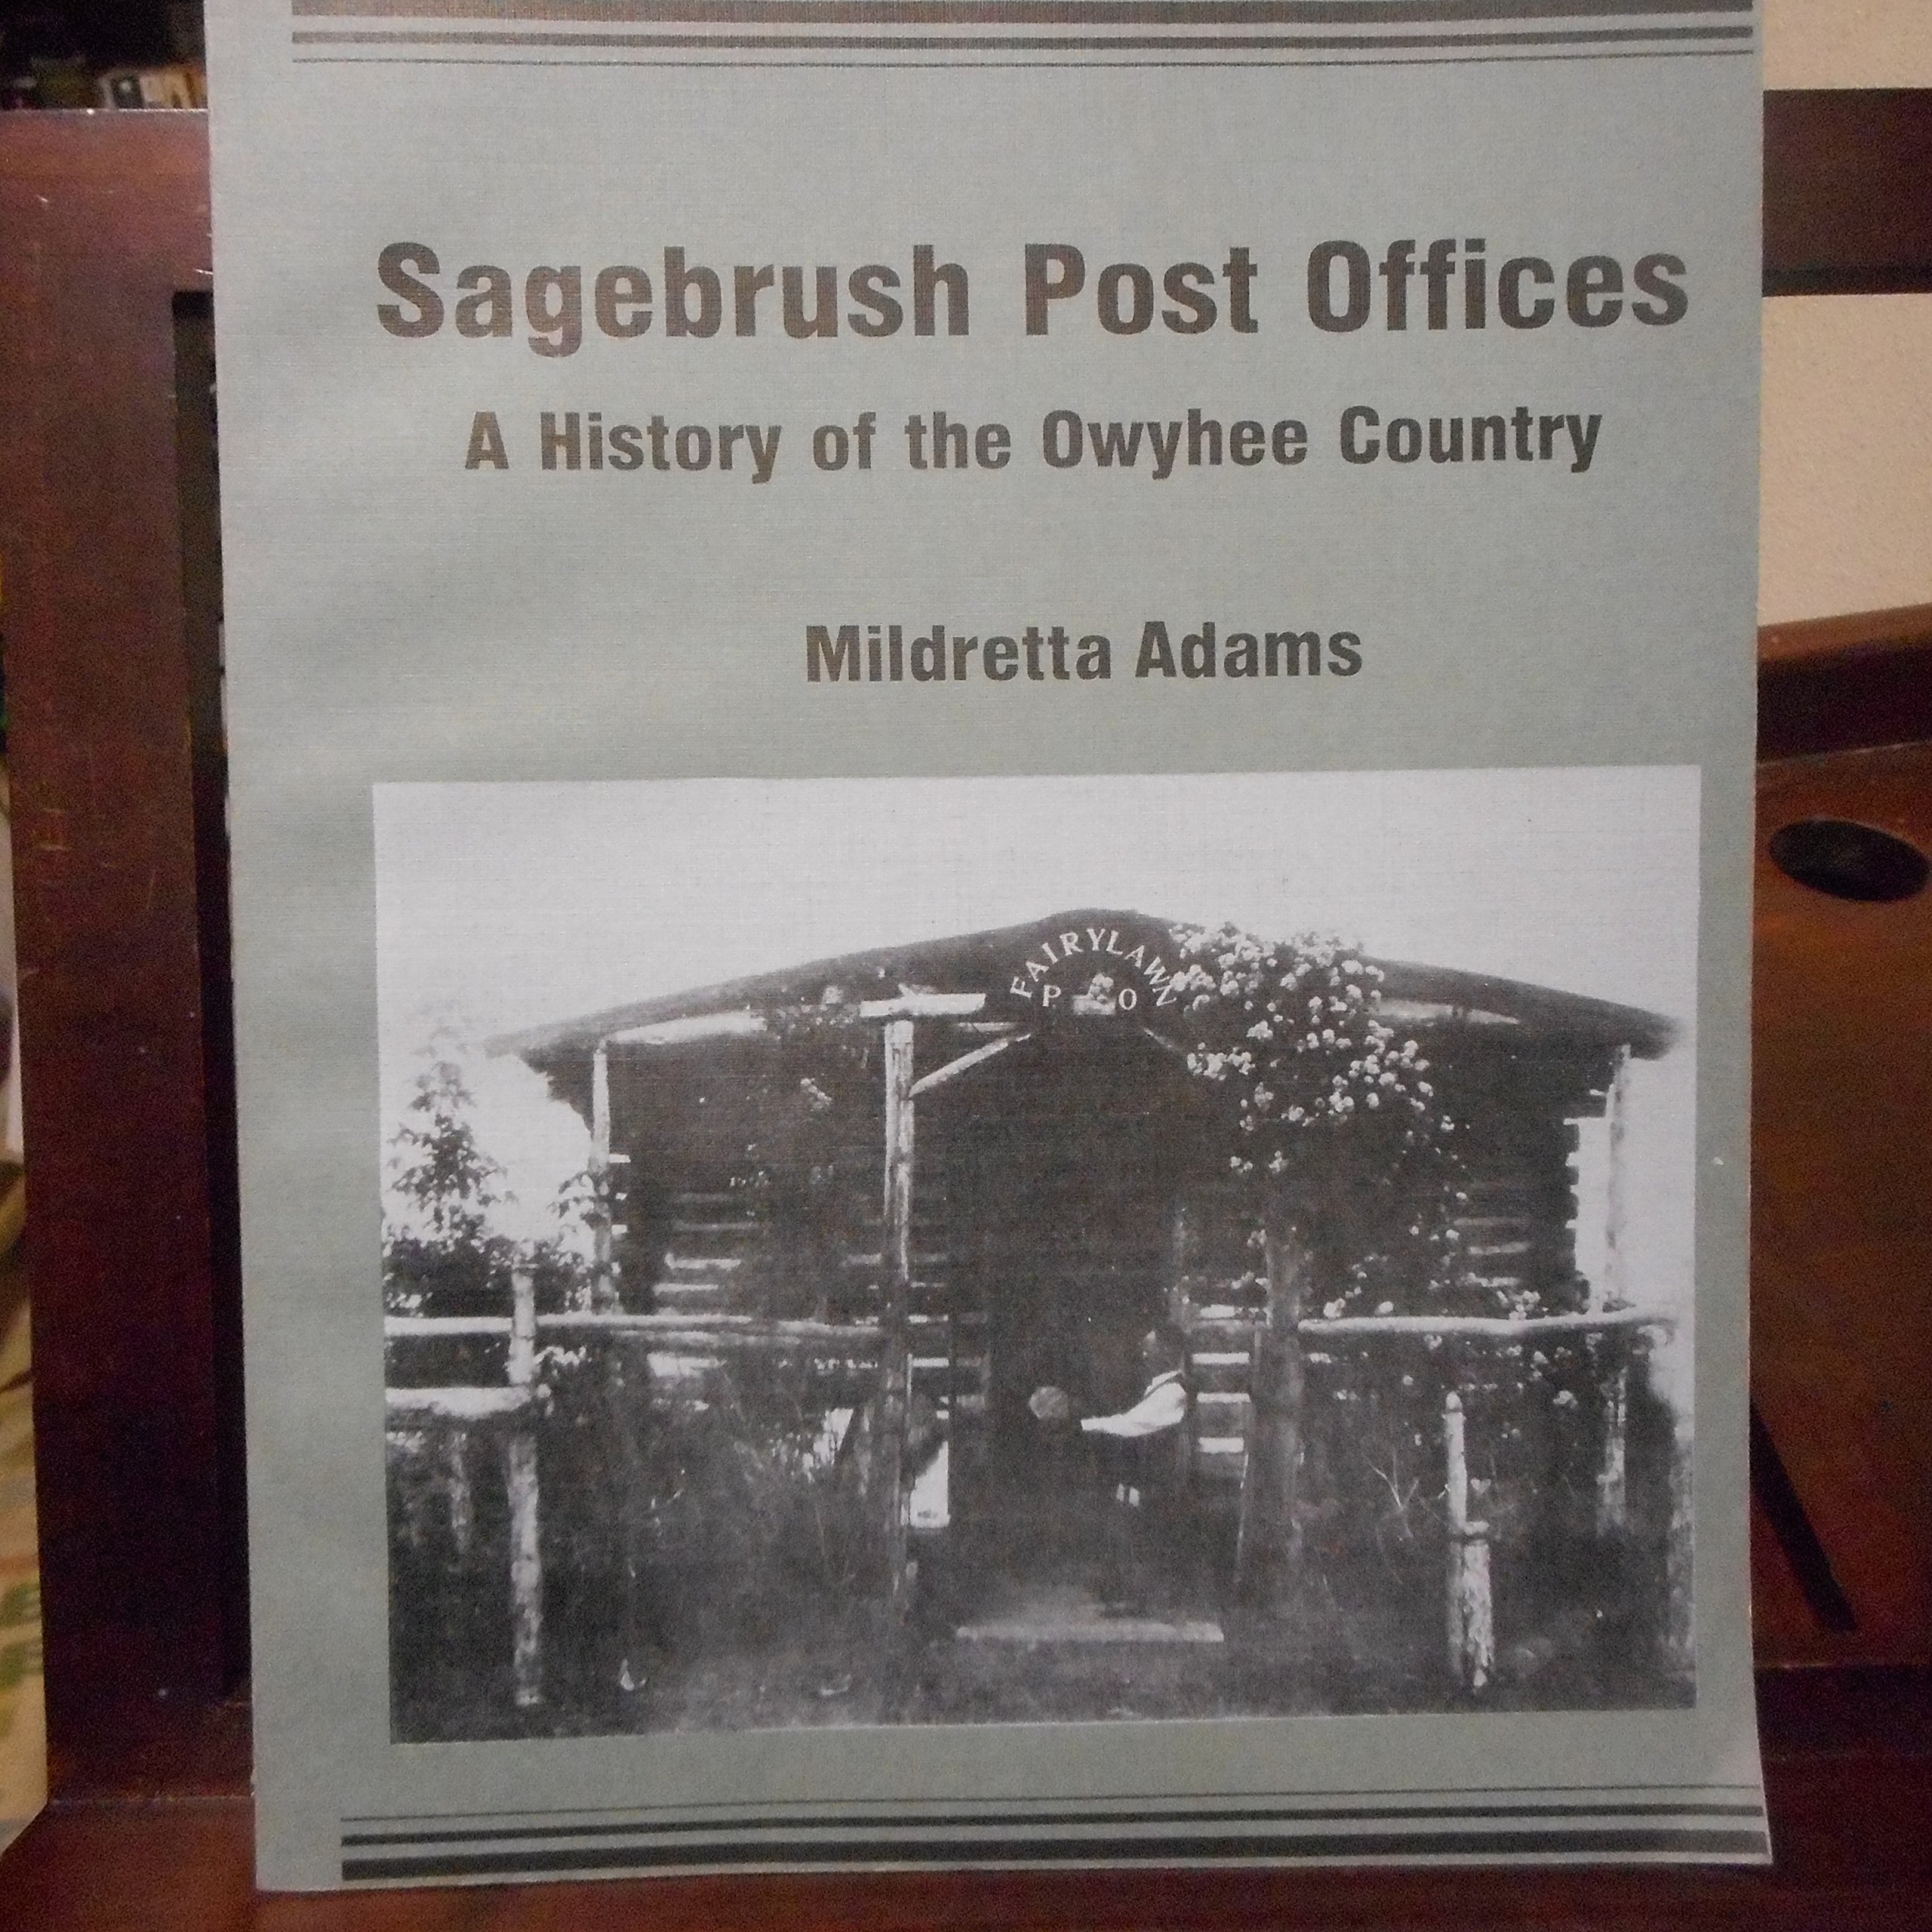 Sagebrush post offices: A history of the Owyhee country (book cover)